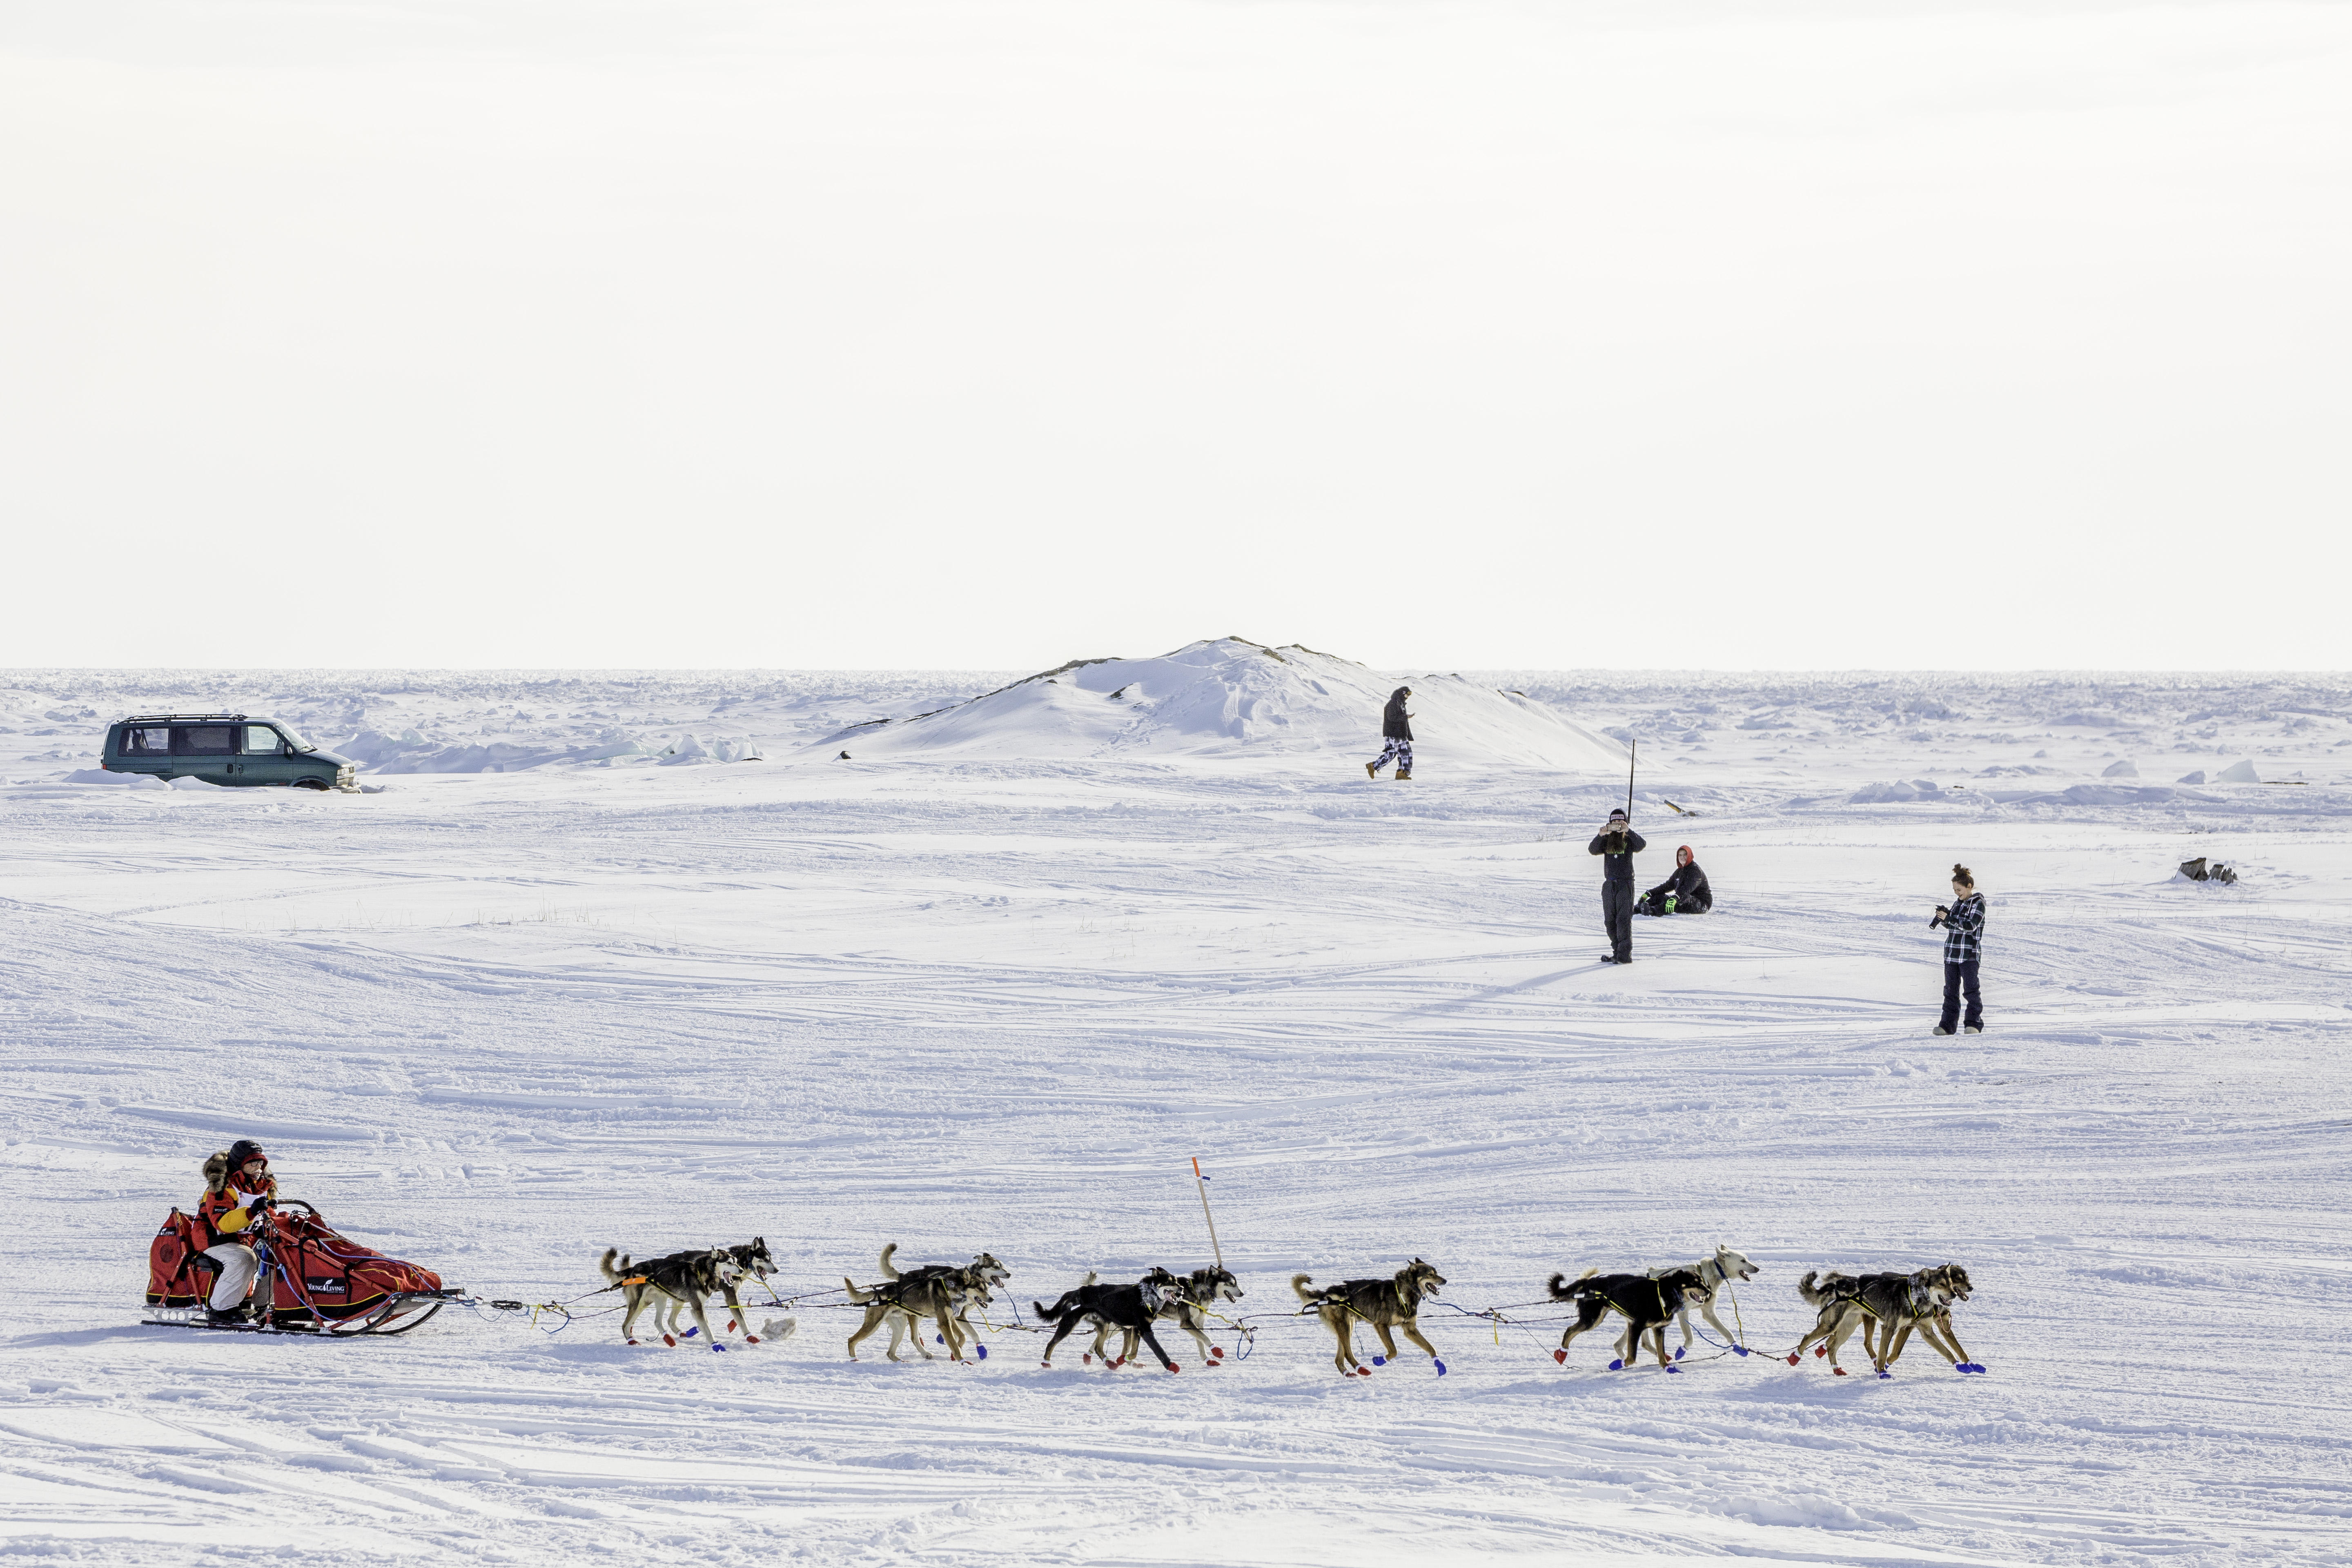 Iditarod 2017 musher and champ, Mitch Seavey, heads for the finish line in Nome.